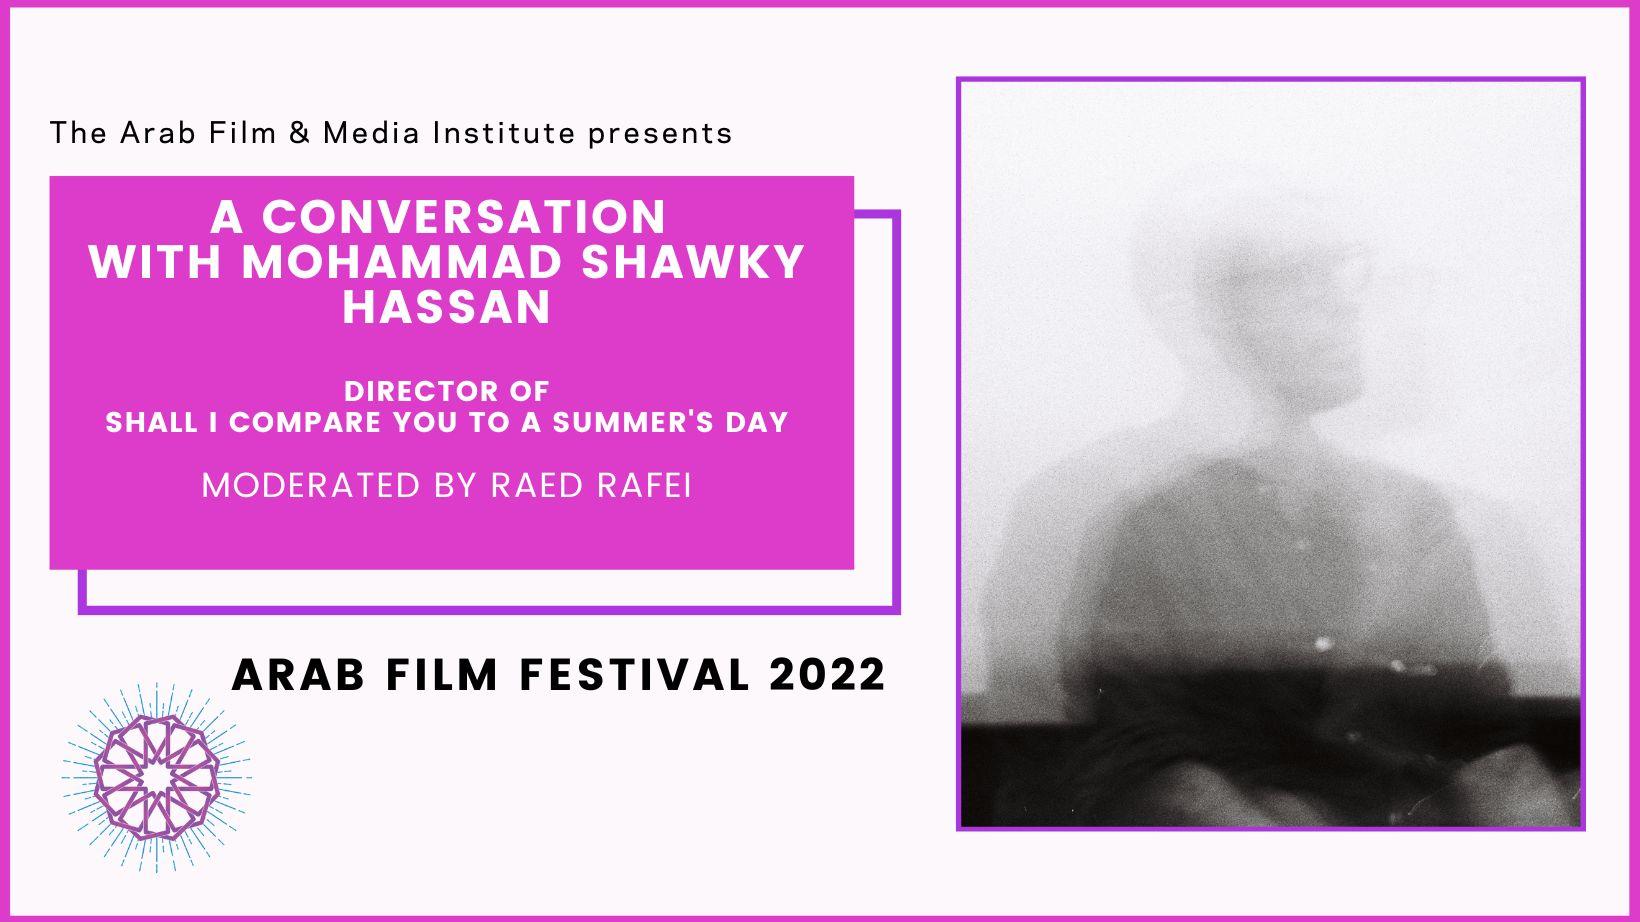 A Conversation with Mohammad Shawky Hassan